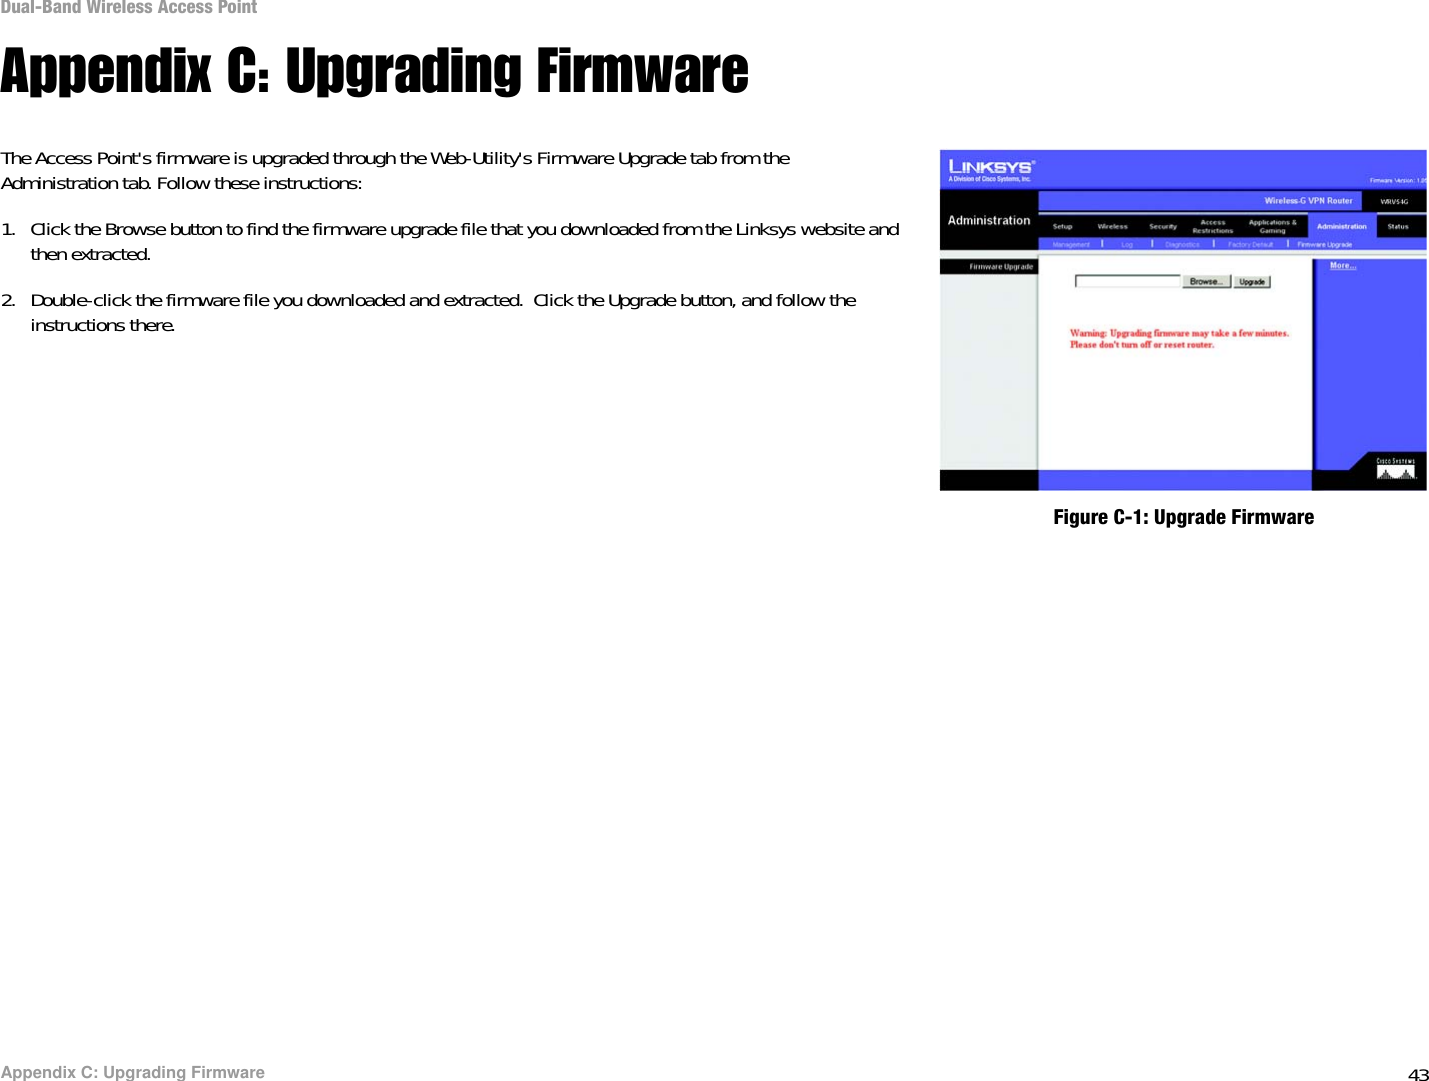 43Appendix C: Upgrading FirmwareDual-Band Wireless Access PointAppendix C: Upgrading FirmwareThe Access Point&apos;s firmware is upgraded through the Web-Utility&apos;s Firmware Upgrade tab from the Administration tab. Follow these instructions:1. Click the Browse button to find the firmware upgrade file that you downloaded from the Linksys website and then extracted. 2. Double-click the firmware file you downloaded and extracted.  Click the Upgrade button, and follow the instructions there.Figure C-1: Upgrade Firmware